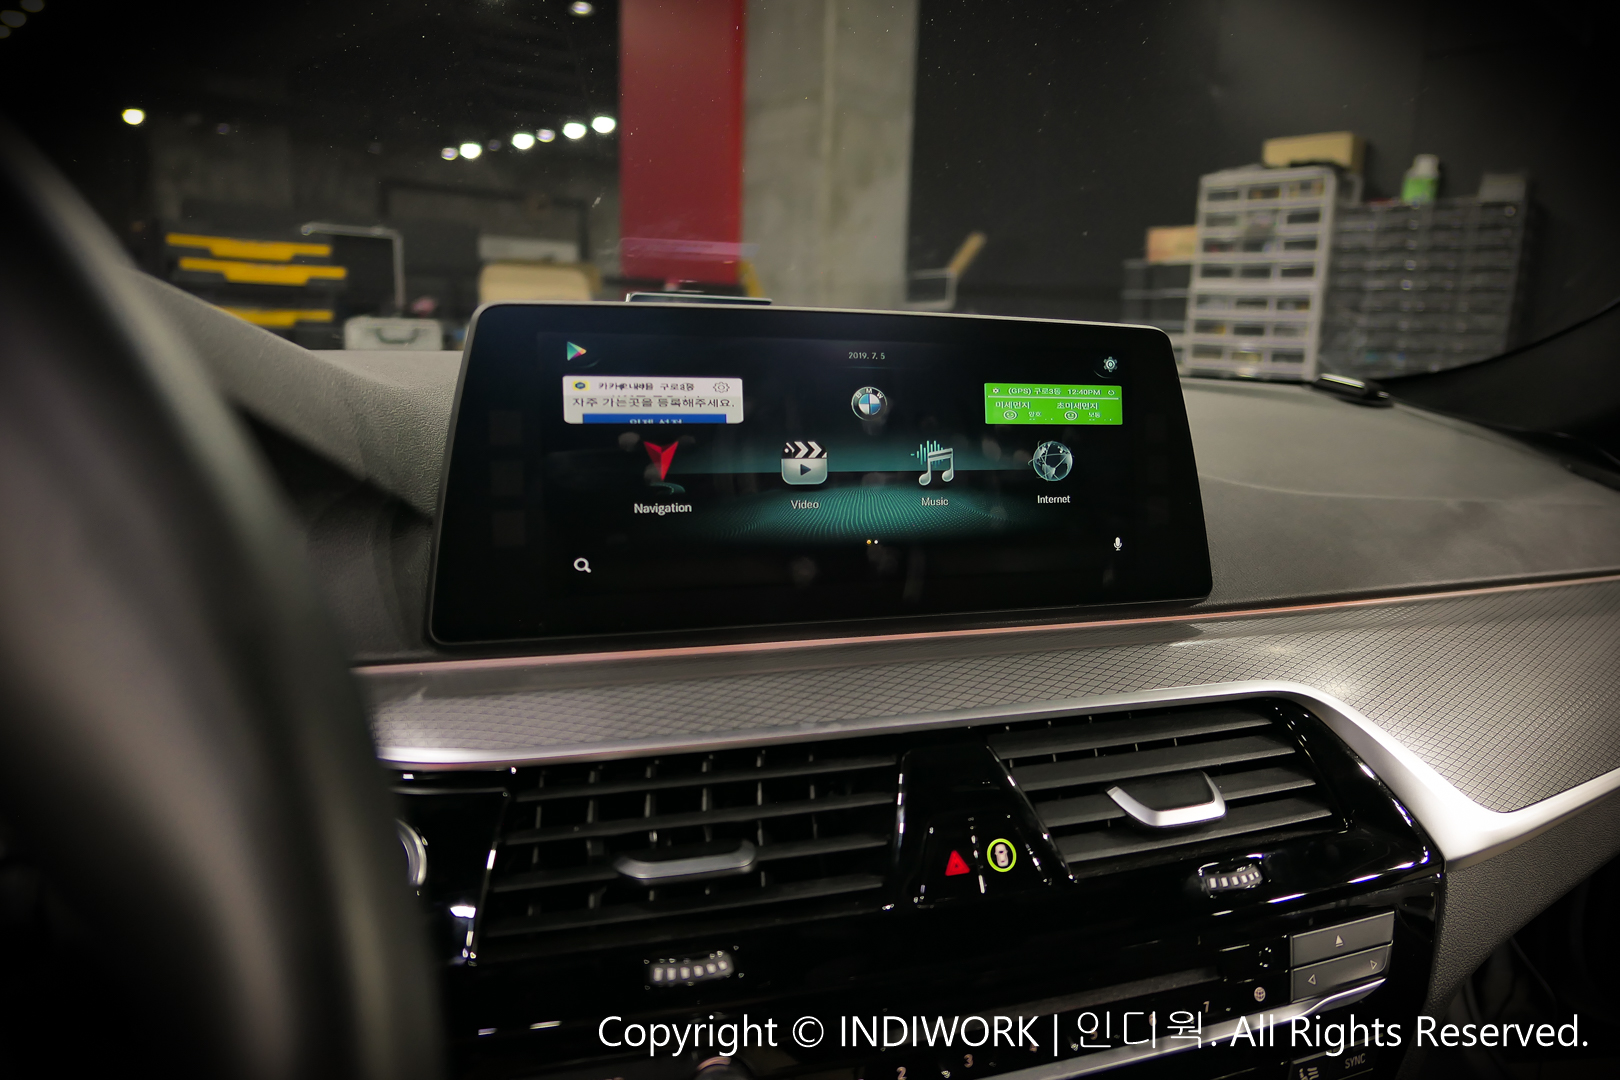 A-LINK2 Total 10Core Android 7.1.2(Nougat) for Car PC